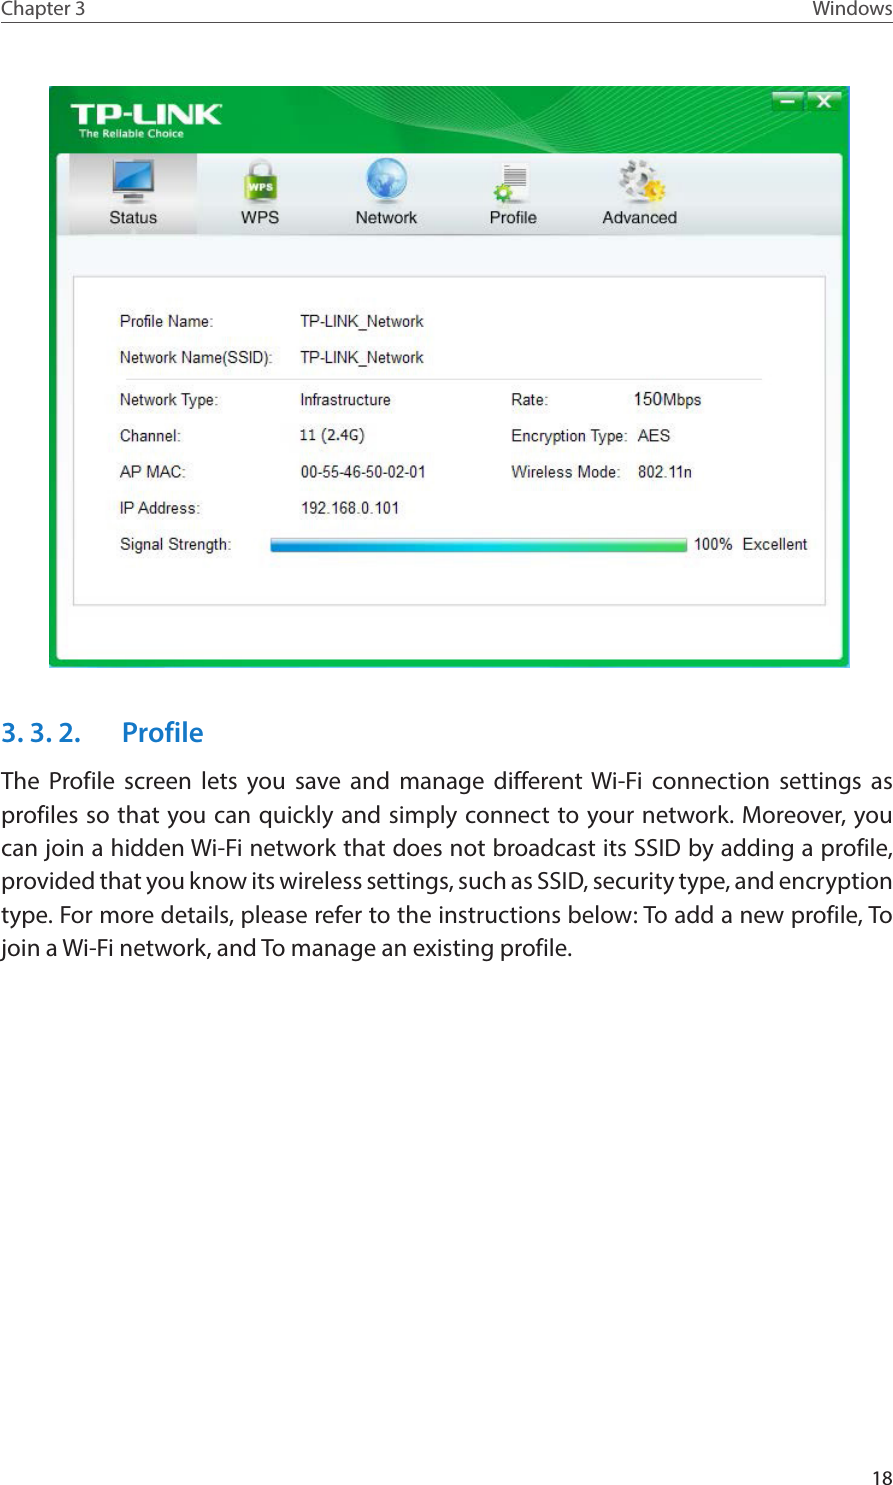 18Chapter 3 Windows 3. 3. 2.  ProfileThe Profile screen lets you save and manage different Wi-Fi connection settings as profiles so that you can quickly and simply connect to your network. Moreover, you can join a hidden Wi-Fi network that does not broadcast its SSID by adding a profile, provided that you know its wireless settings, such as SSID, security type, and encryption type. For more details, please refer to the instructions below: To add a new profile, To join a Wi-Fi network, and To manage an existing profile.